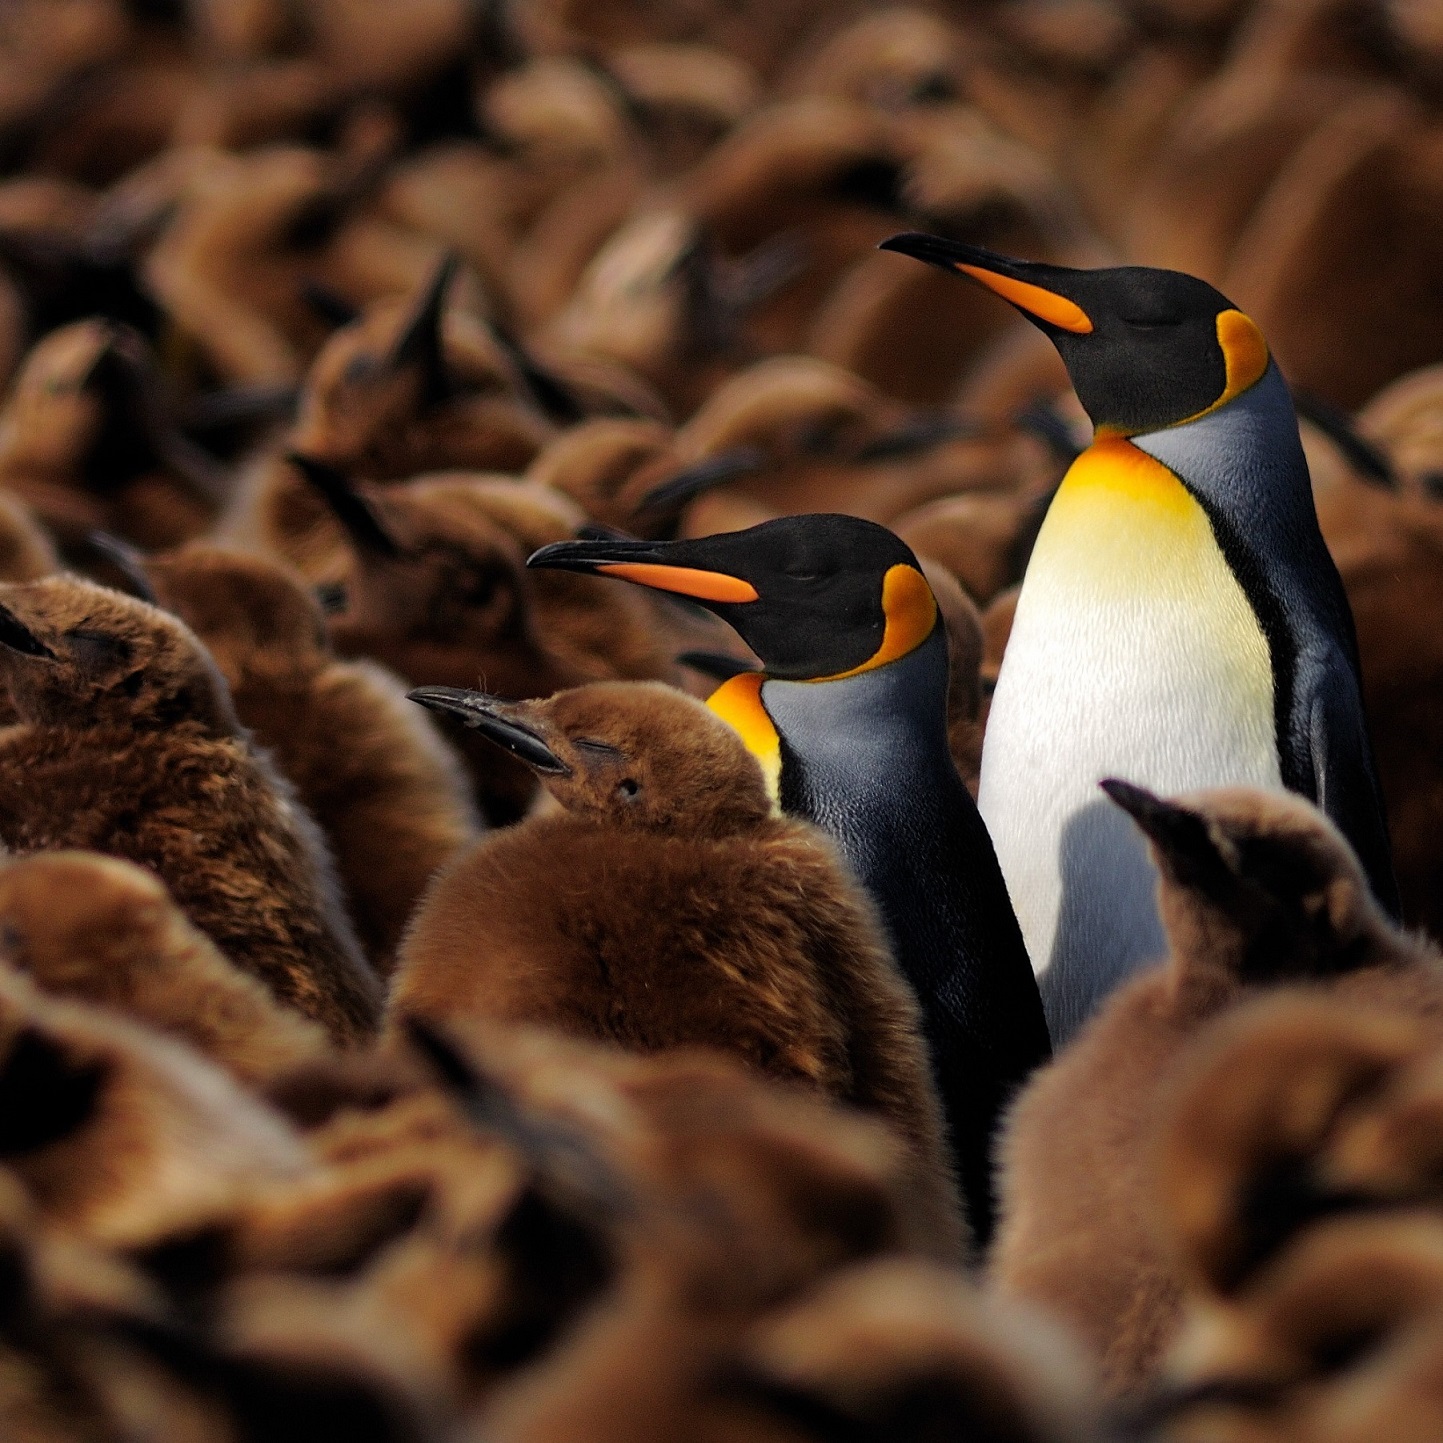 Two adult penguins in bright colours stand between many brown-coloured juveniles